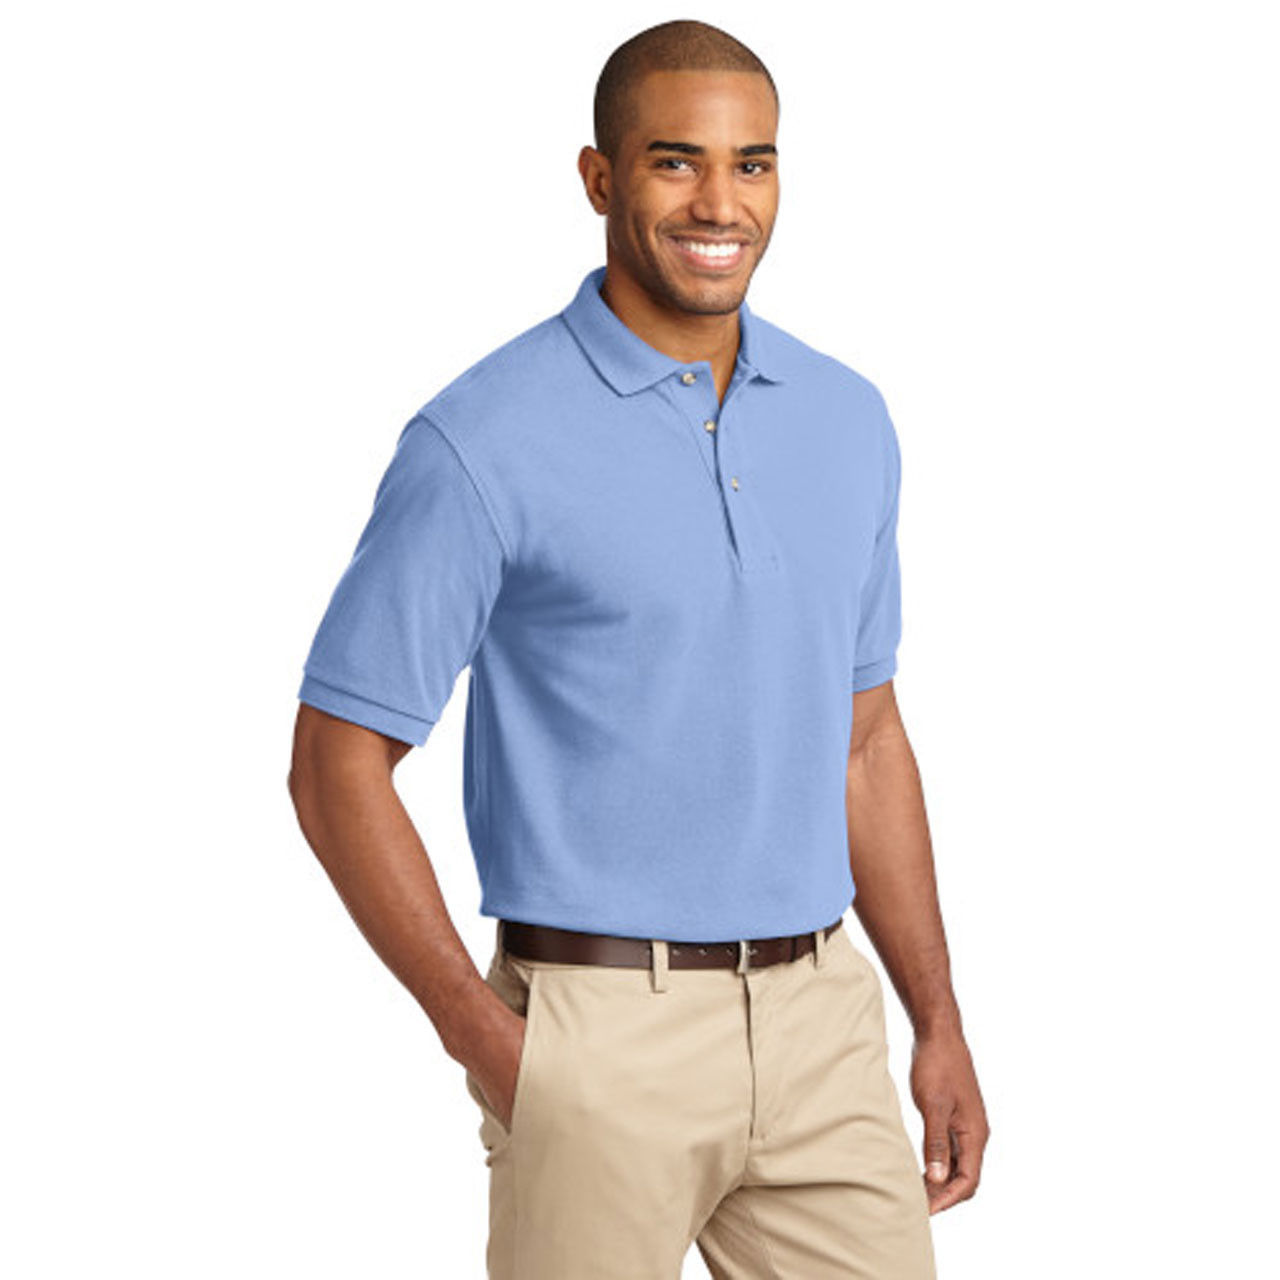 Does the men's blue polo khaki pants have any vents?